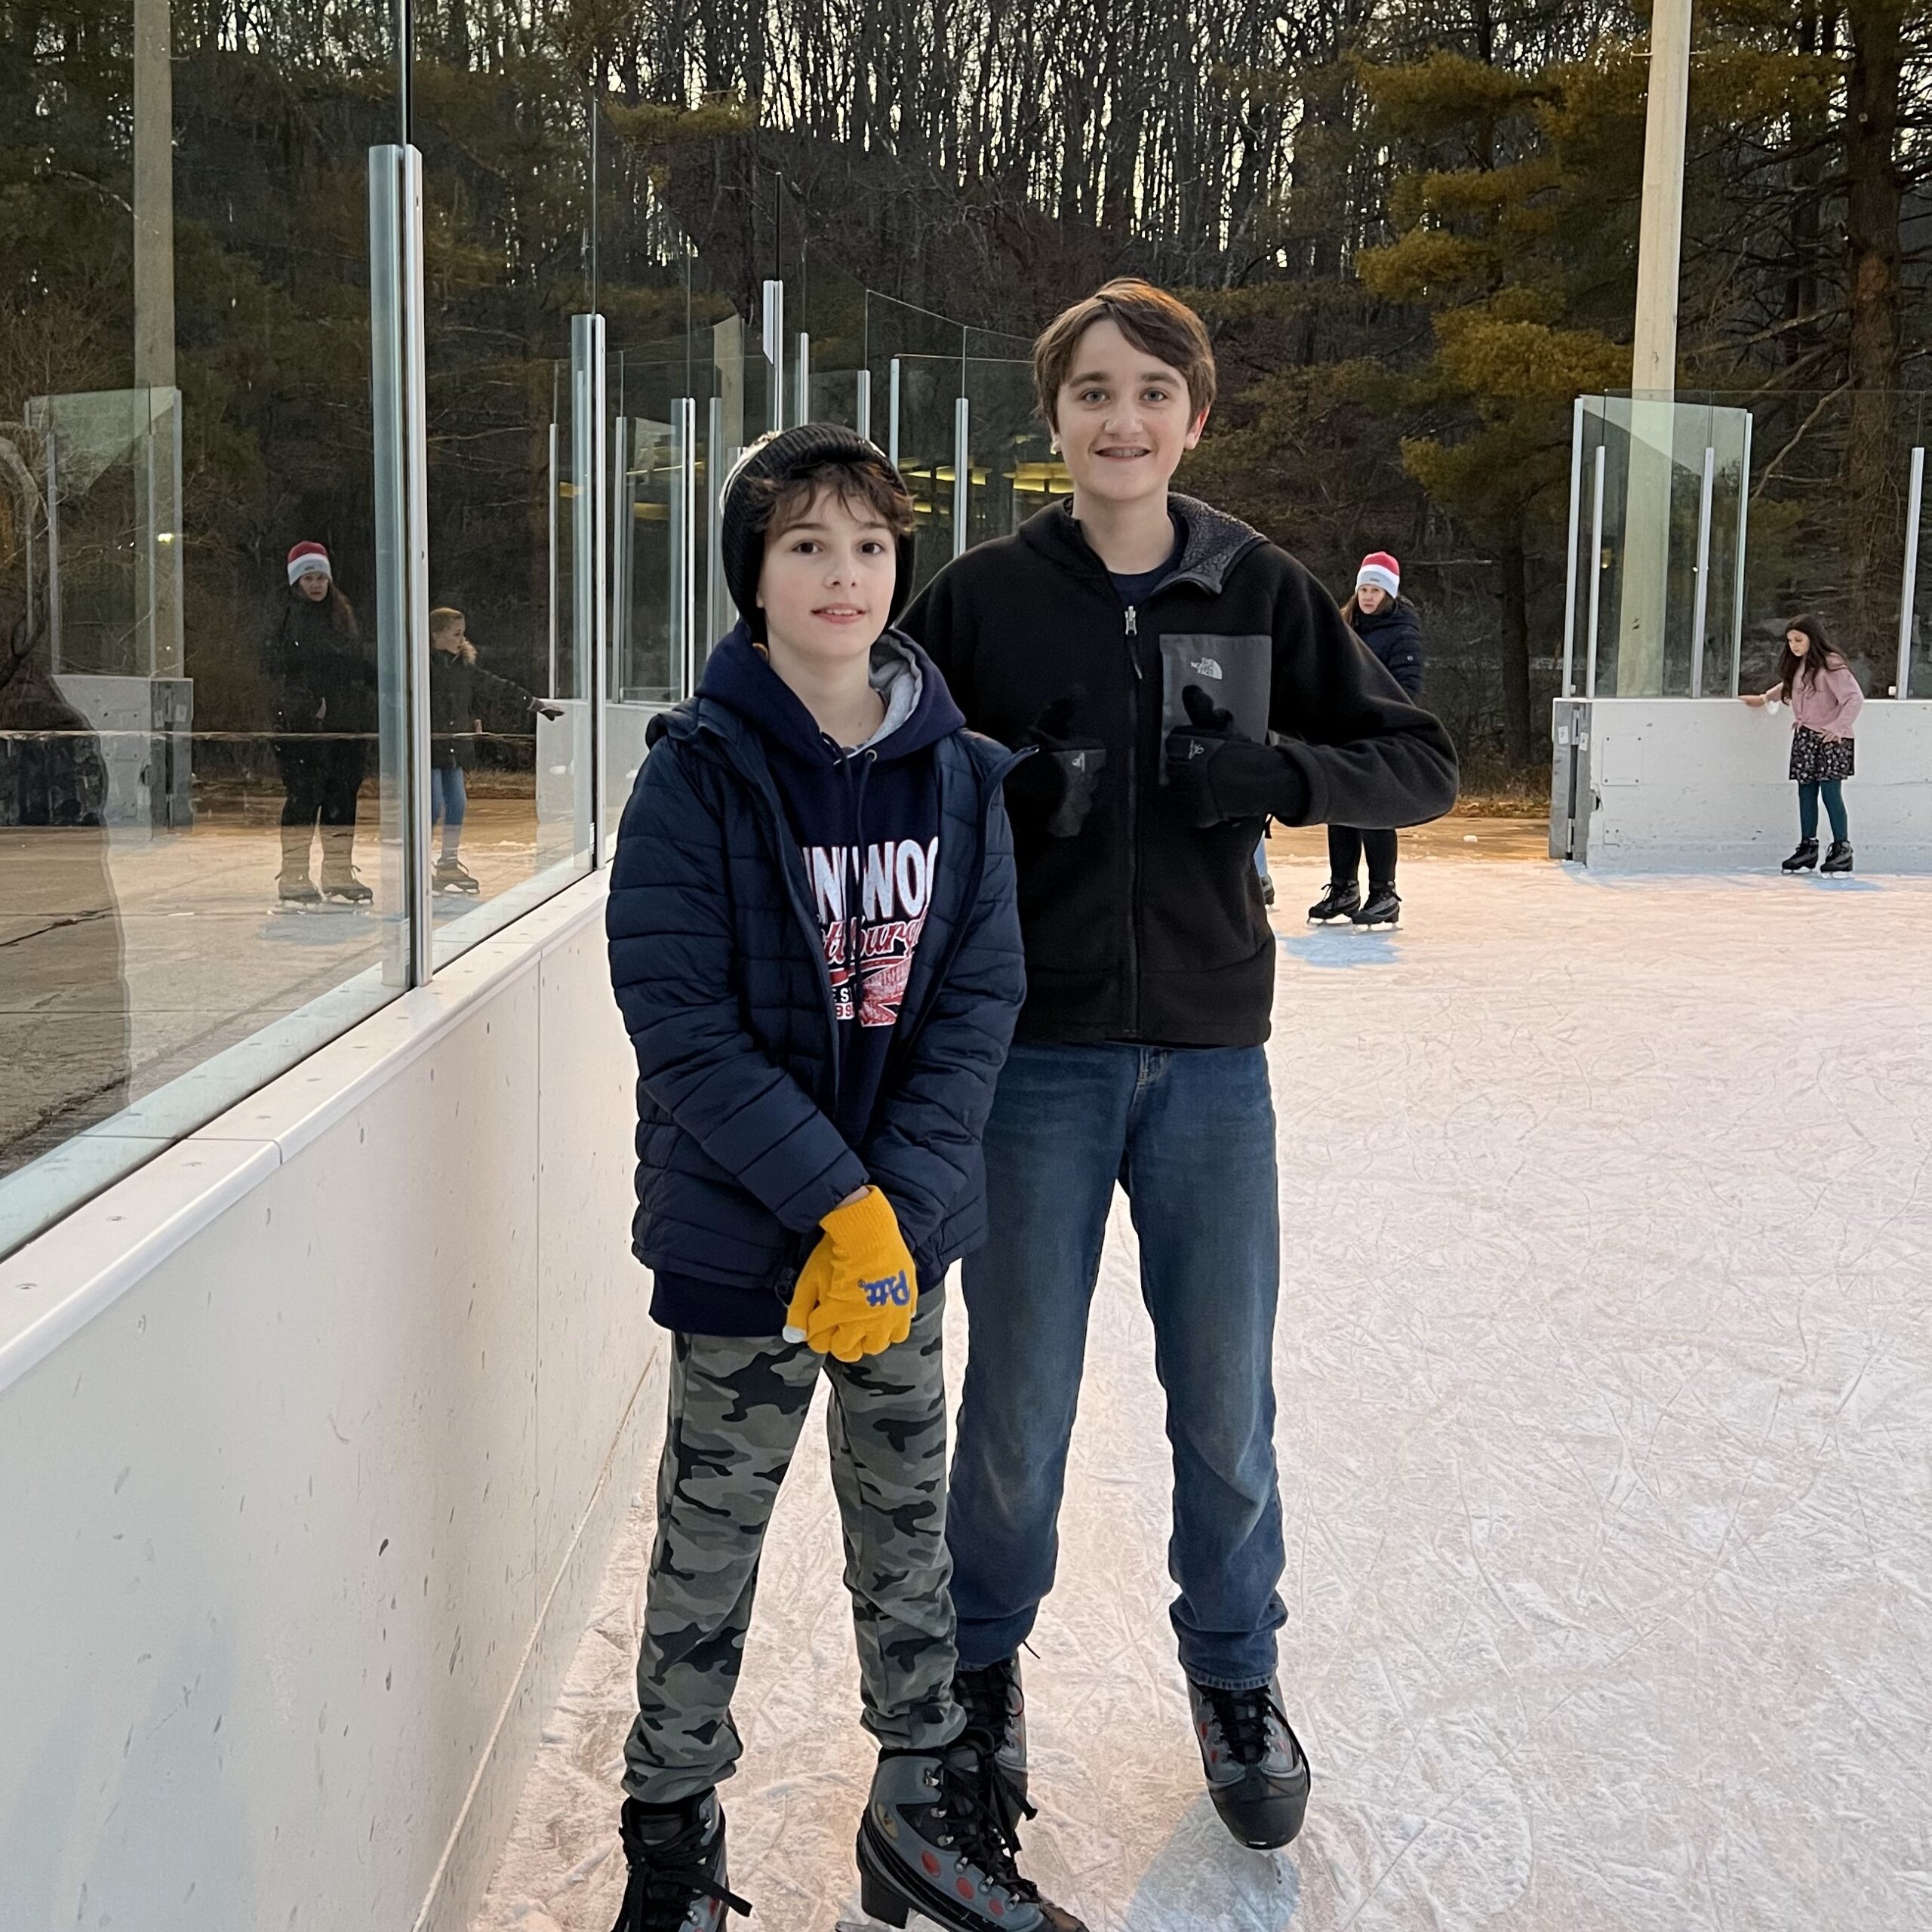 Glen Alum gather to skate with their friends at the Snowflake Skate!